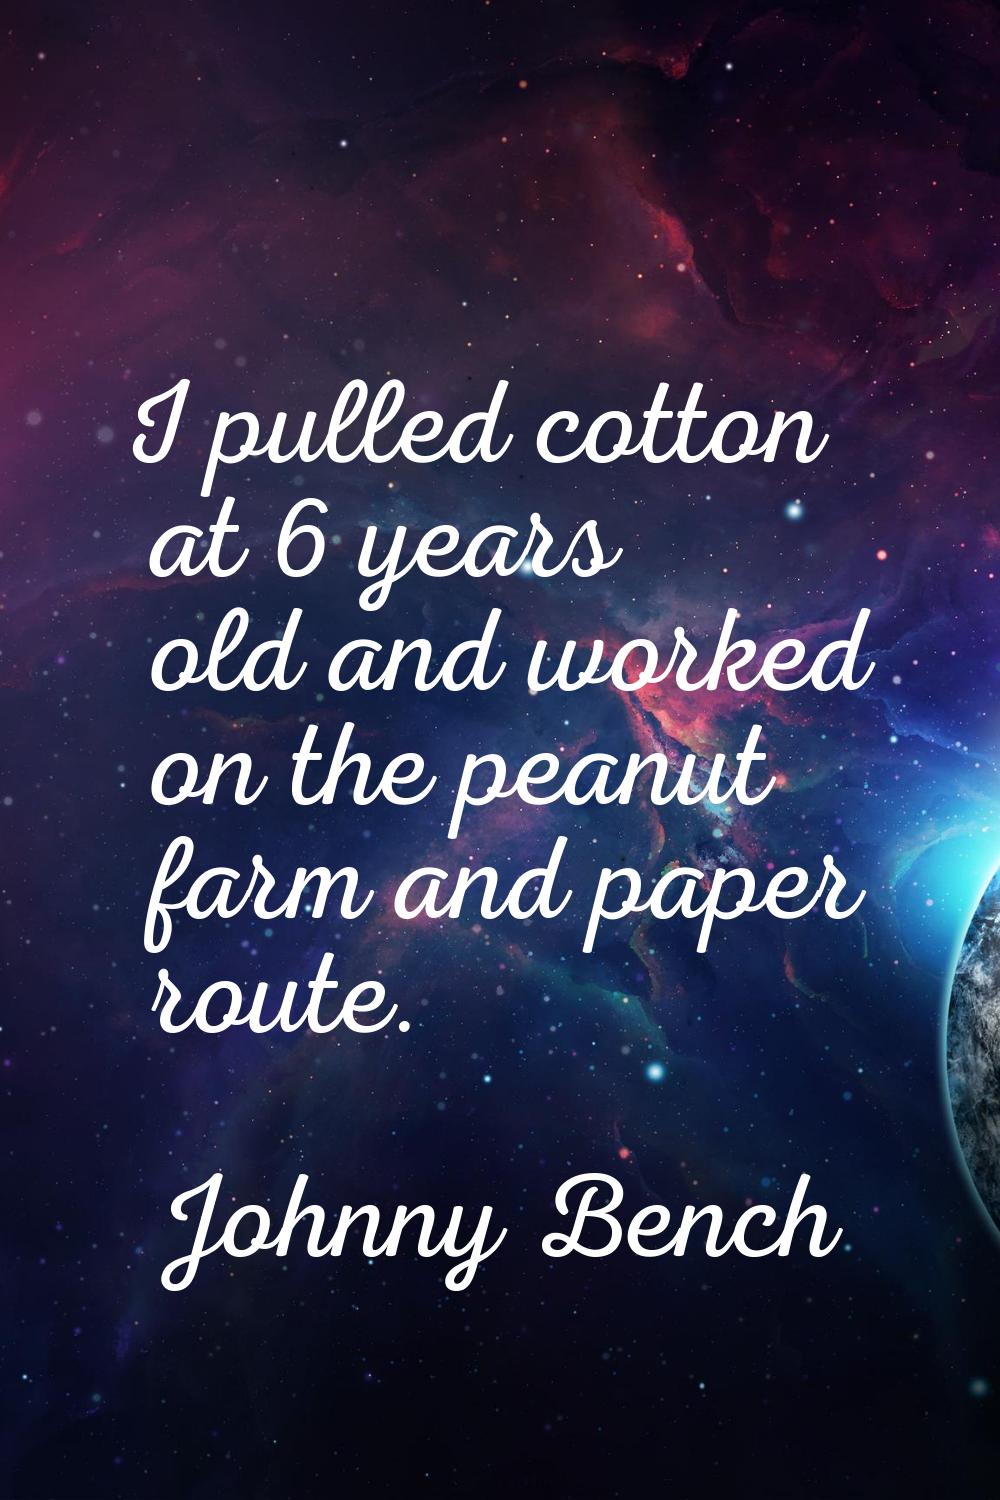 I pulled cotton at 6 years old and worked on the peanut farm and paper route.